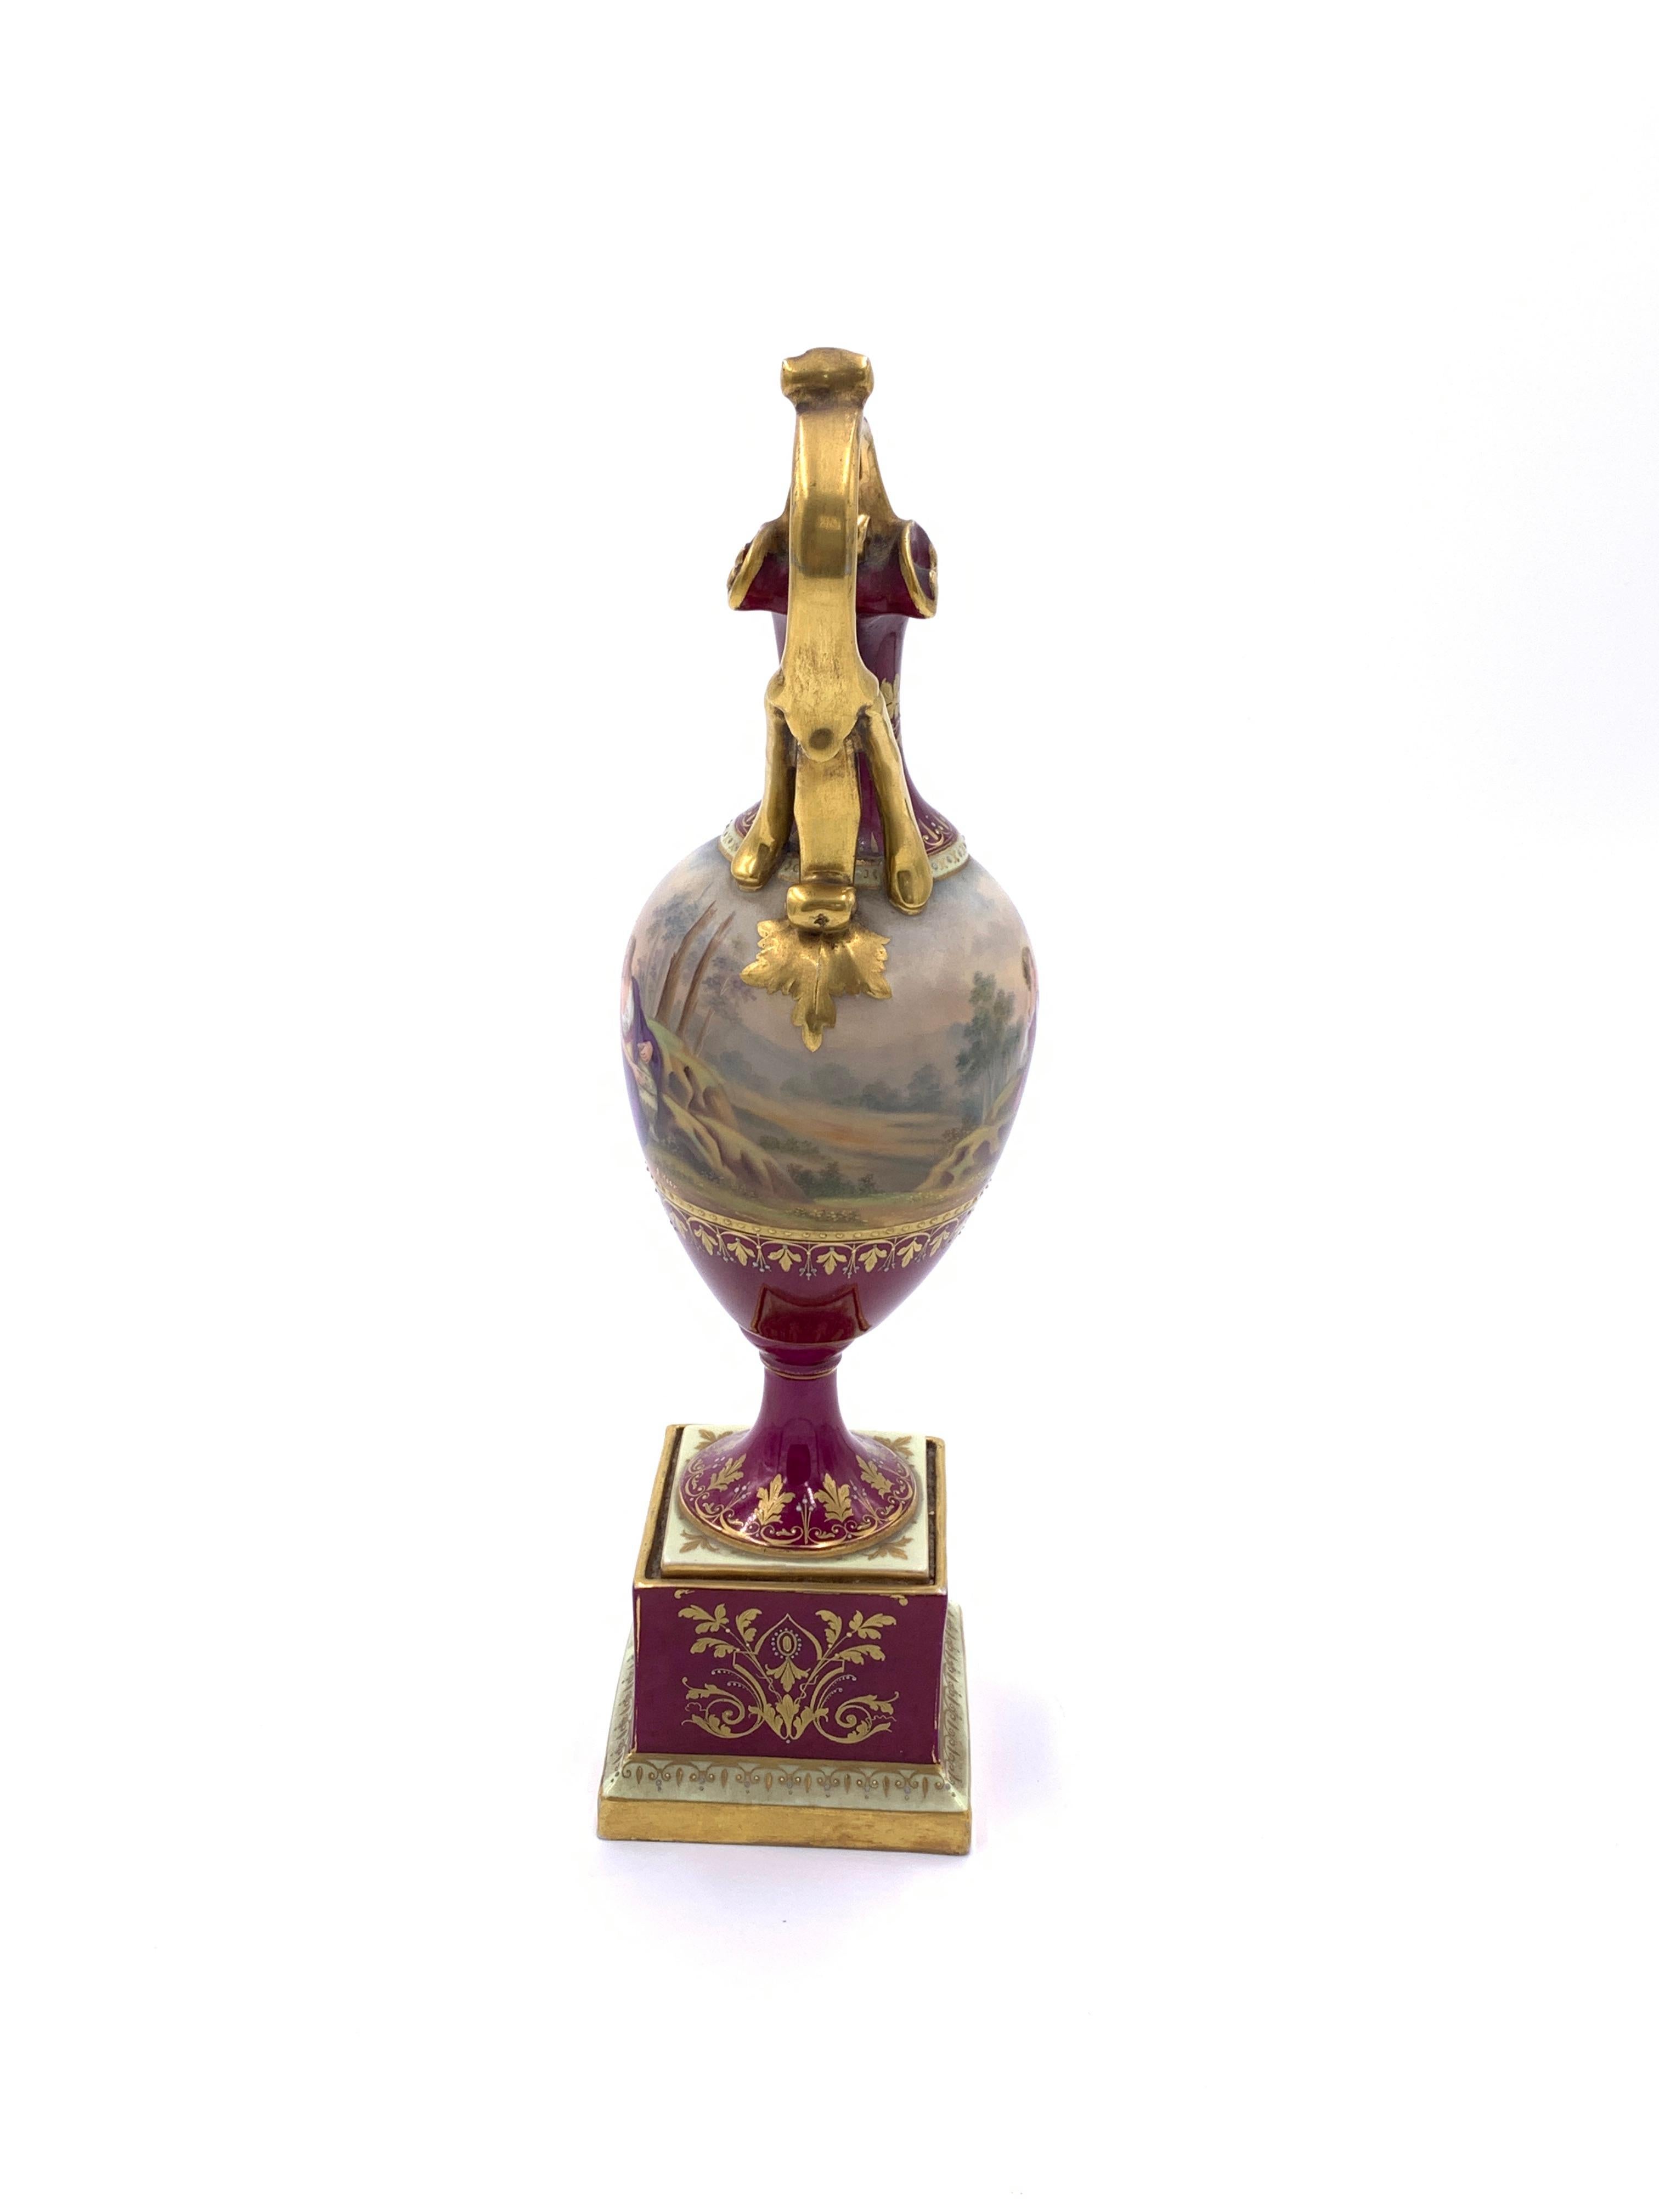 A fine 19th century royal Vienna ewer on square stand with red and gilded decoration, blue beehive mark stamped on the base. 
   